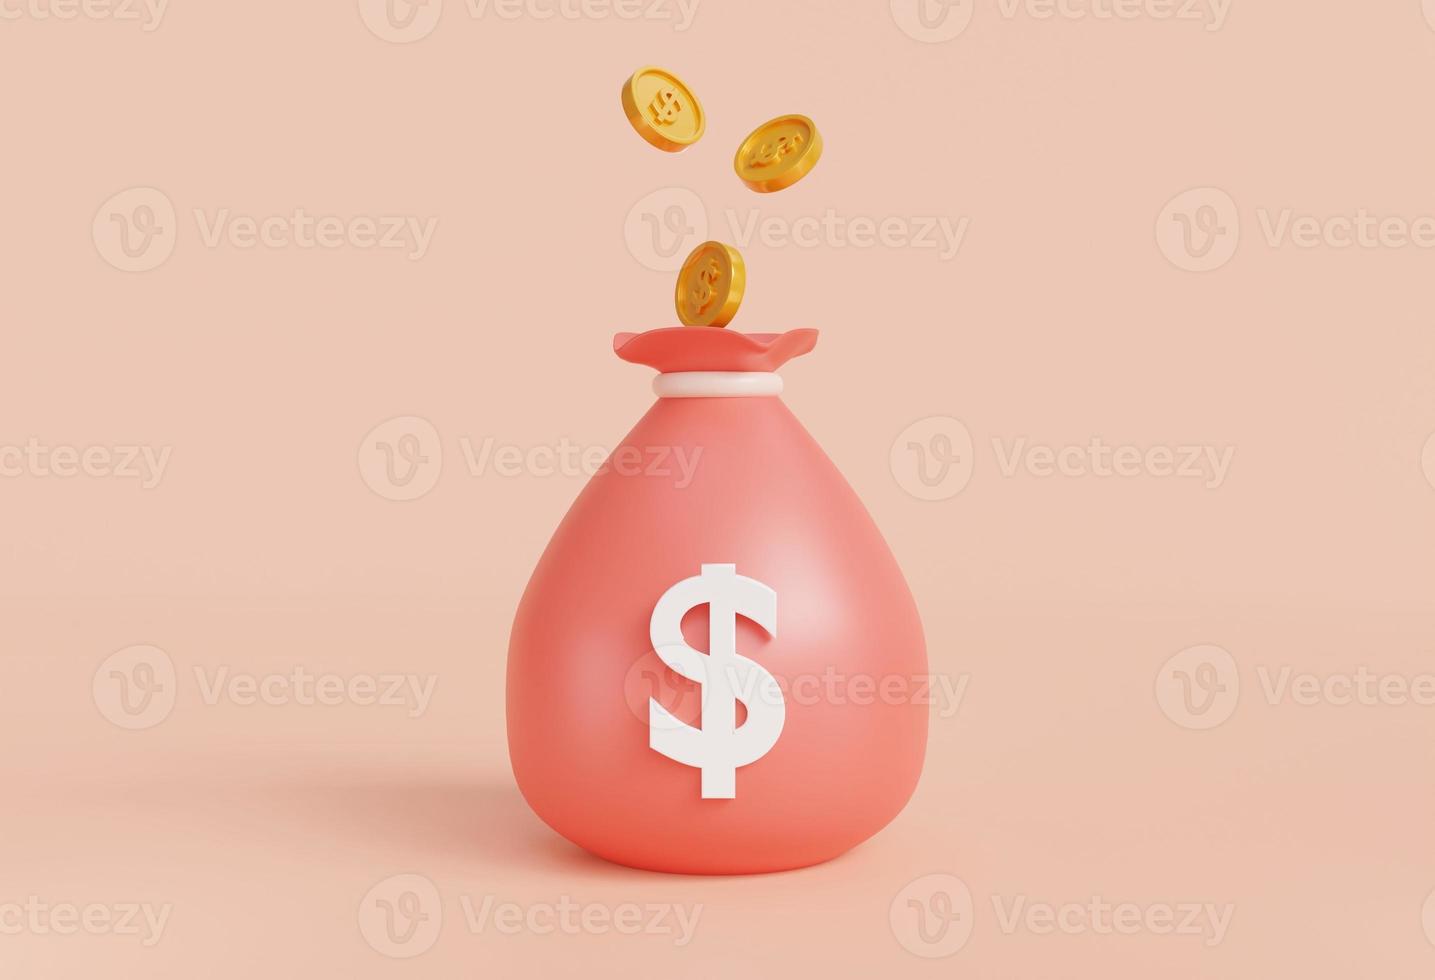 Money bag isolated on pink background. Money saving concept.Symbol of goals in savings.investing and business.money management.Saving and Money bags icon. Dollar.3D rendering,illustration photo